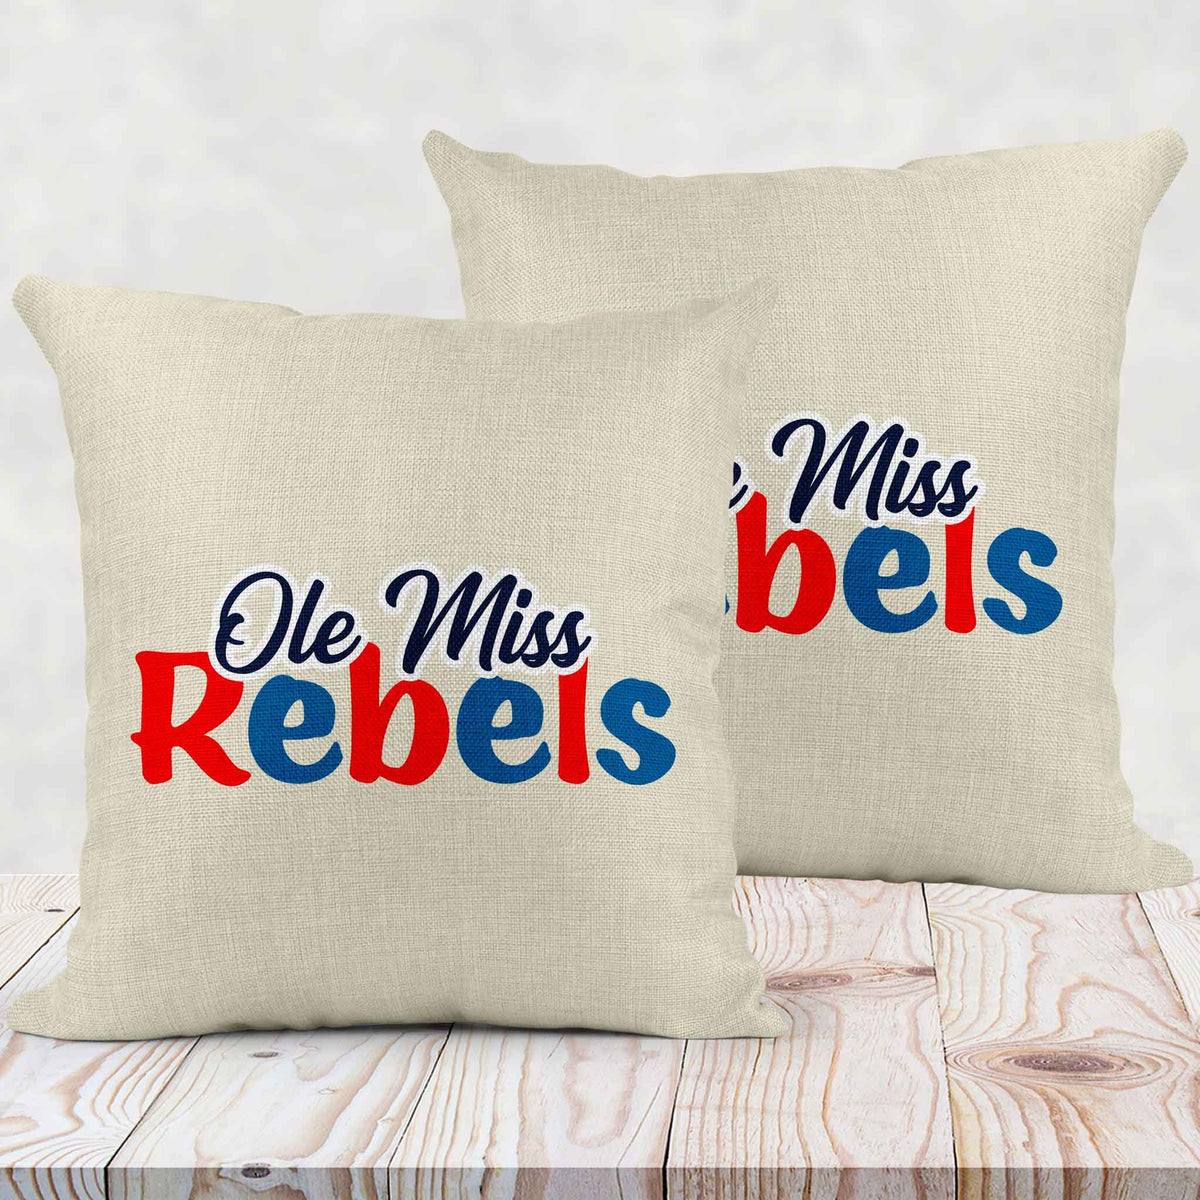 Personalized Throw Pillow | Custom Decorative Pillow | Ole Miss